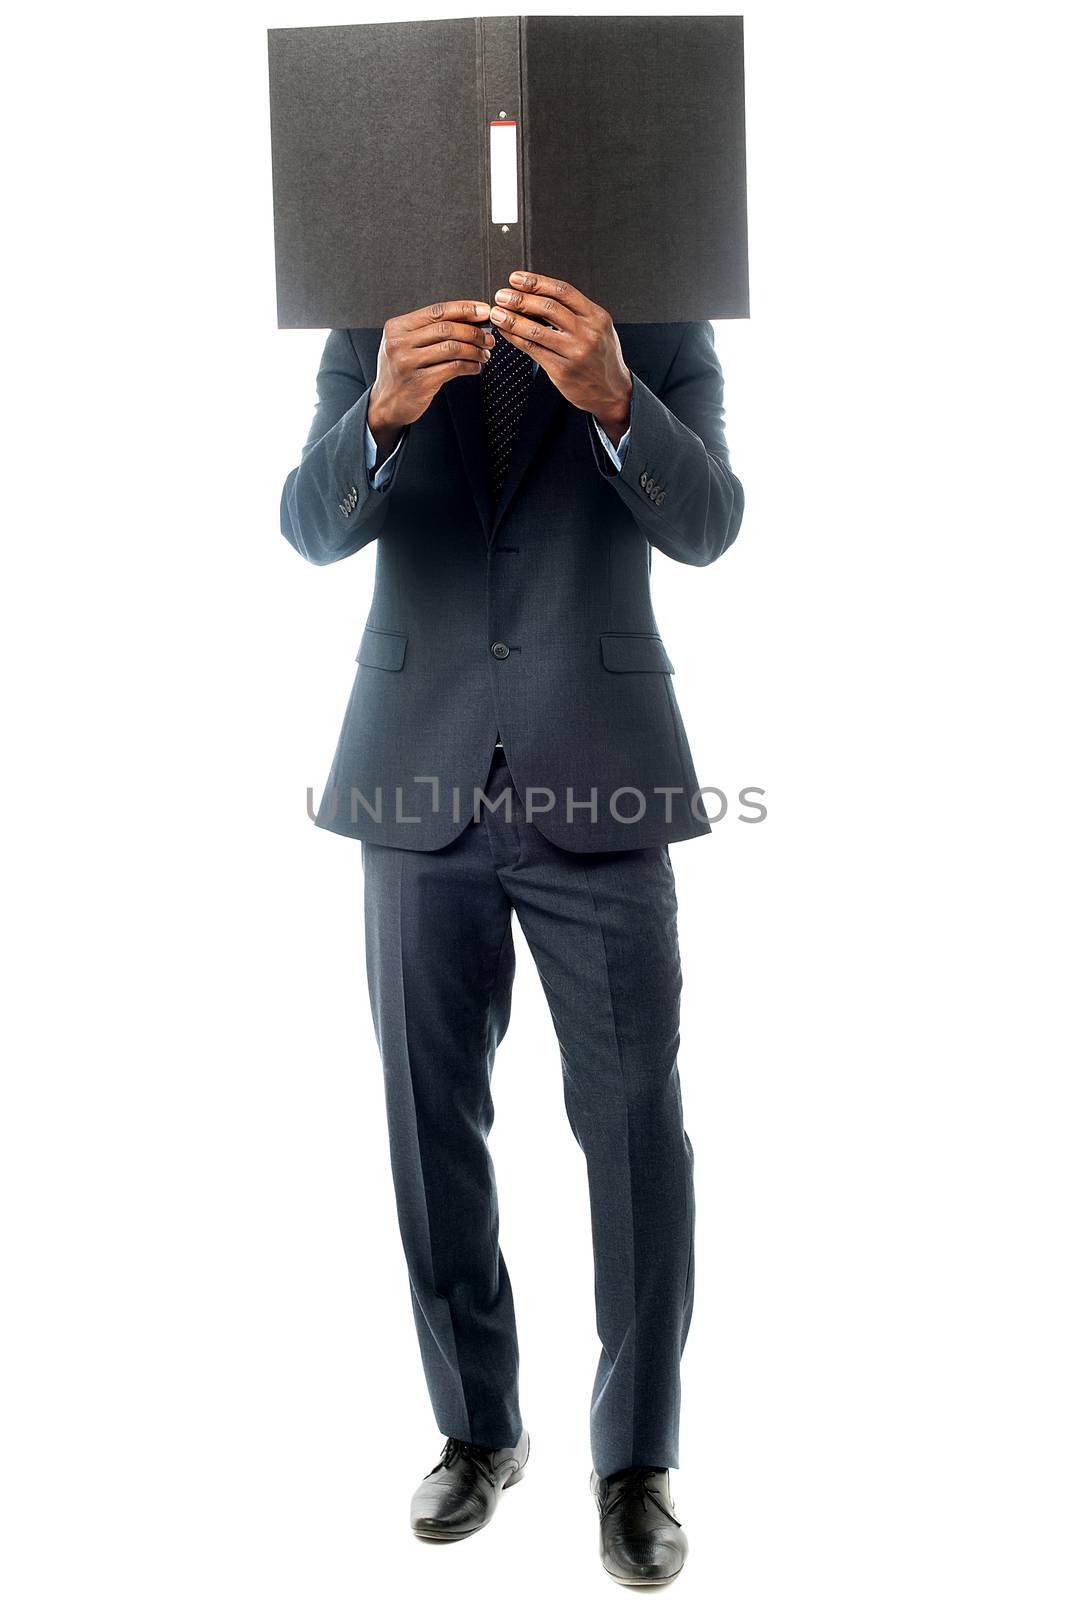 I am busy in reading reports.  by stockyimages